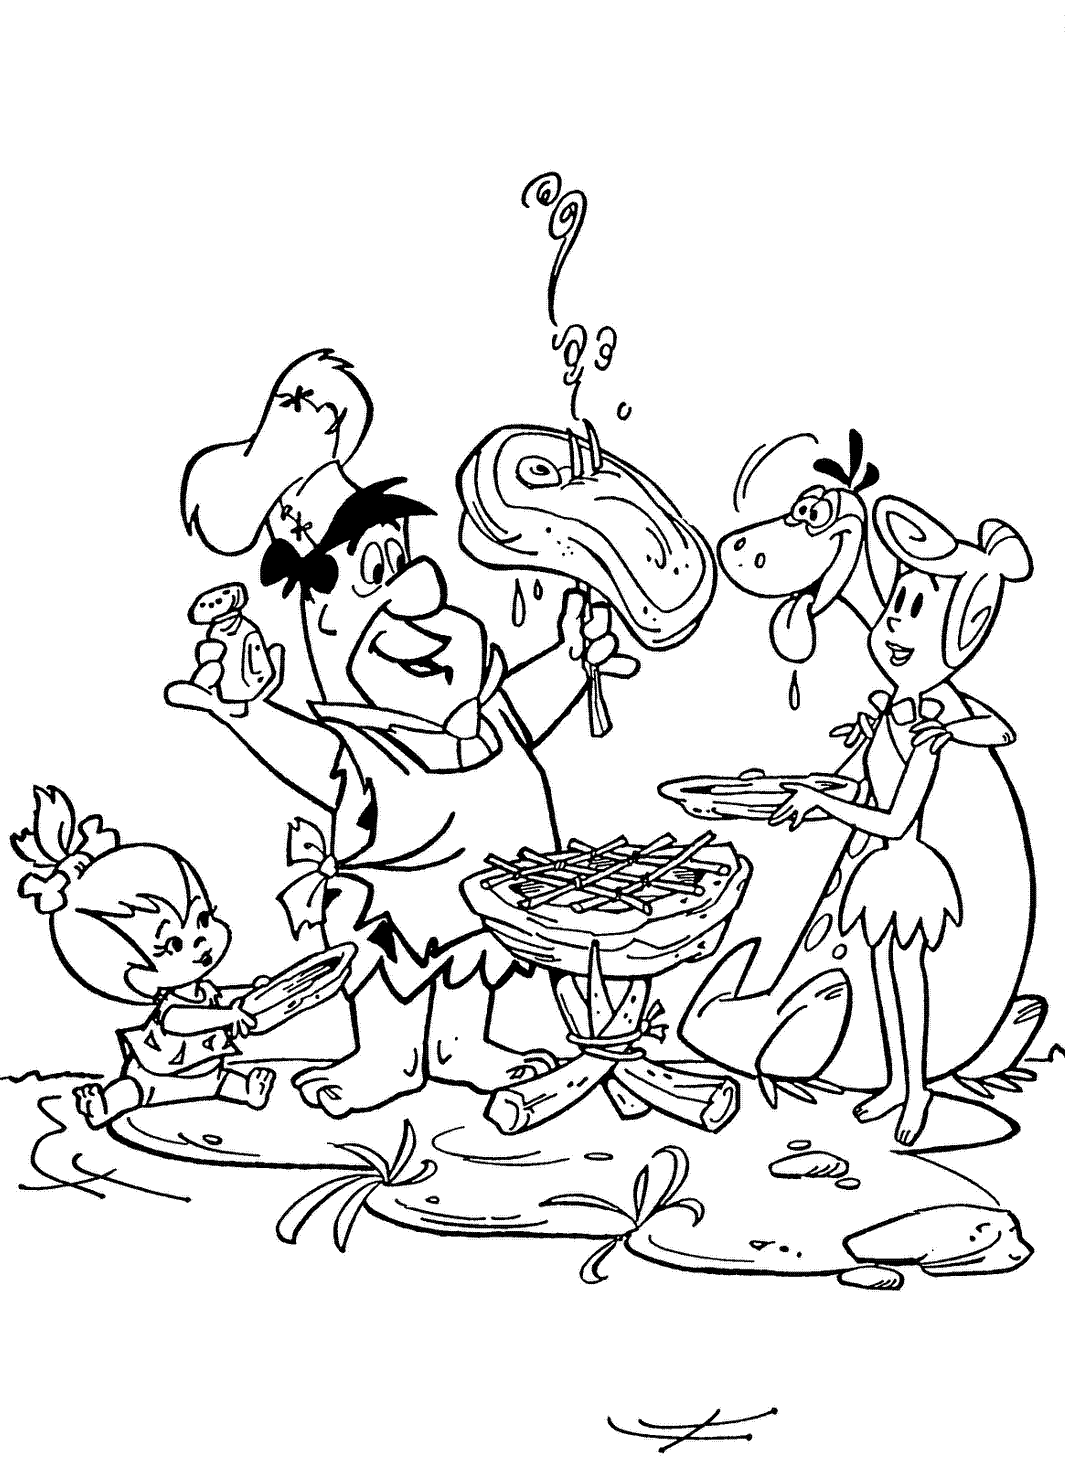 coloring images fun coloring pages disney goofy coloring pages coloring images 